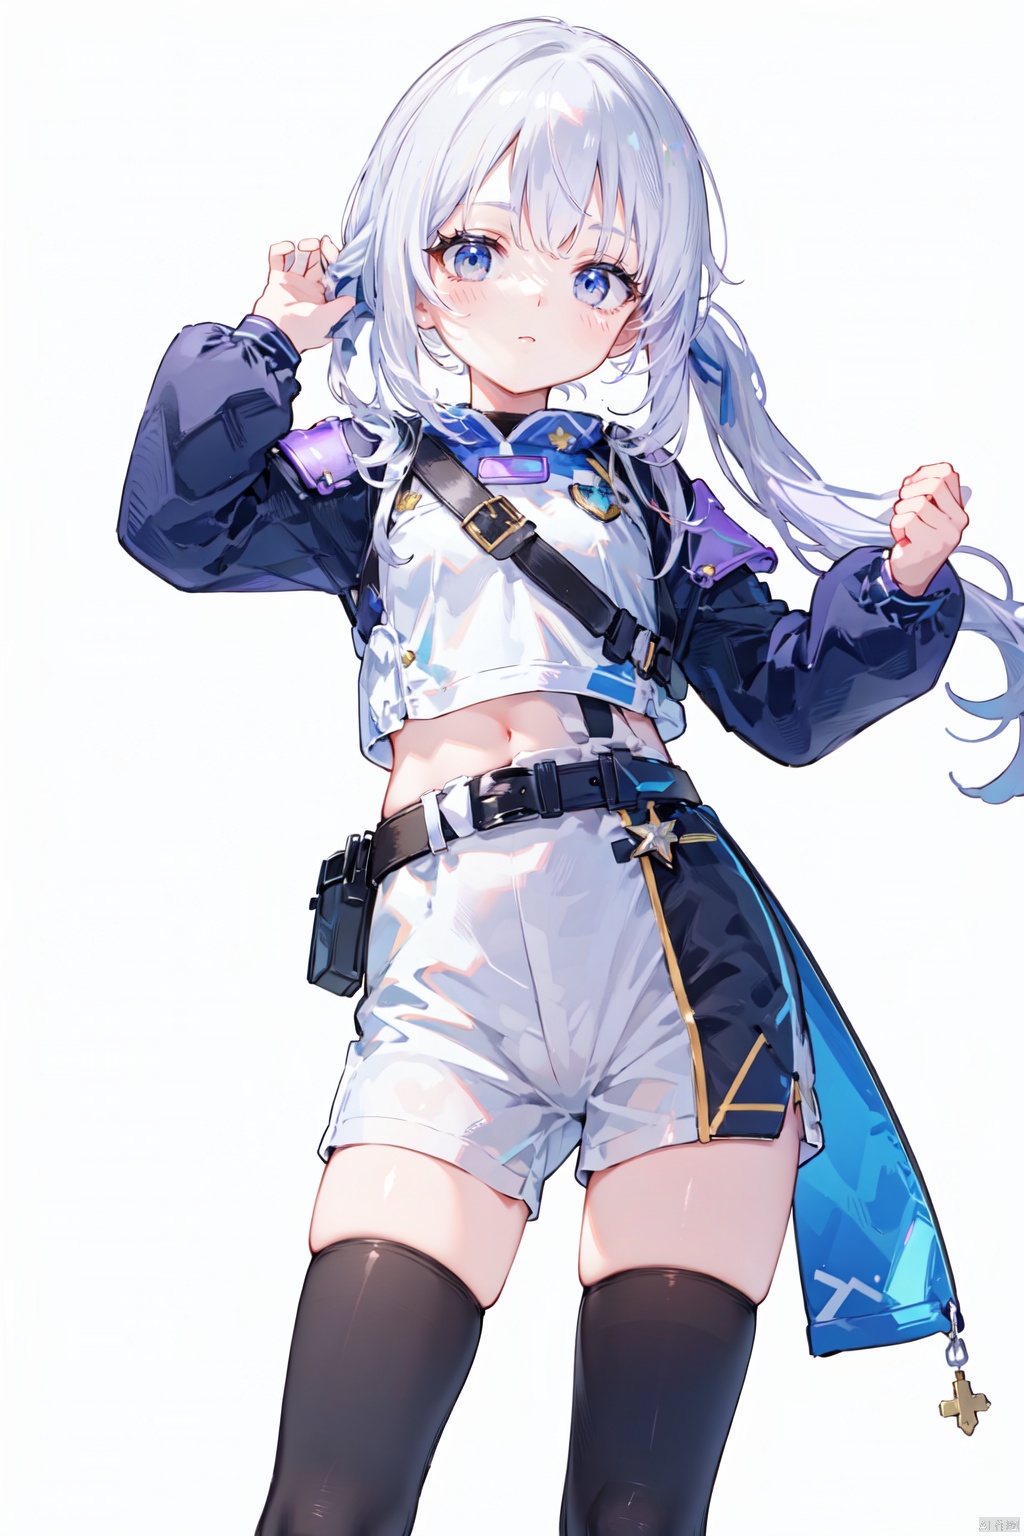 (((white background))),((poakl)),1character, full body, nikke inspired outfit, anime style, action pose, semi-realistic, pvc tactical gear, armored bikini top, high waisted shorts, thigh-high stockings, combat boots, mechanical wings, scoped rifle, detailed hair accessories, twin tails, purple hair, multiple belts with pouches, pauldrons, exposed abdomen, metallic accents, intricate armor design, serious expression, dynamic lighting, firearm sling, holographic sights, bionic enhancements, translucent visor, environmental reflections, sci-fi background